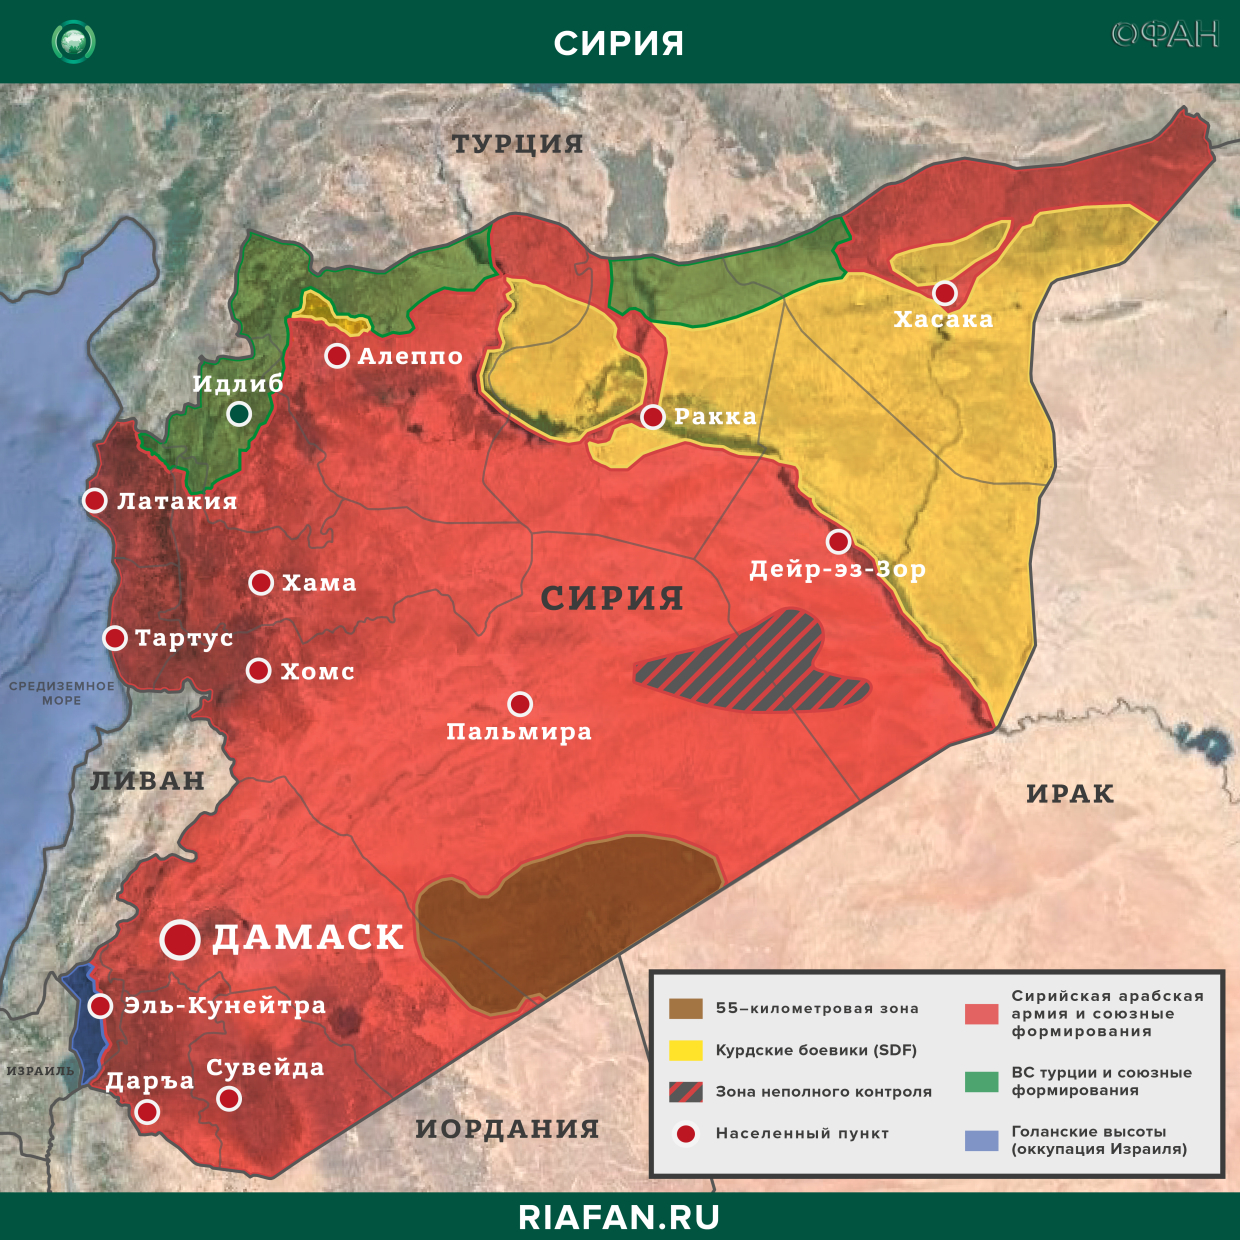 Syria news 31 August 16.30: Turkish Armed Forces begin construction of a new checkpoint in Idlib